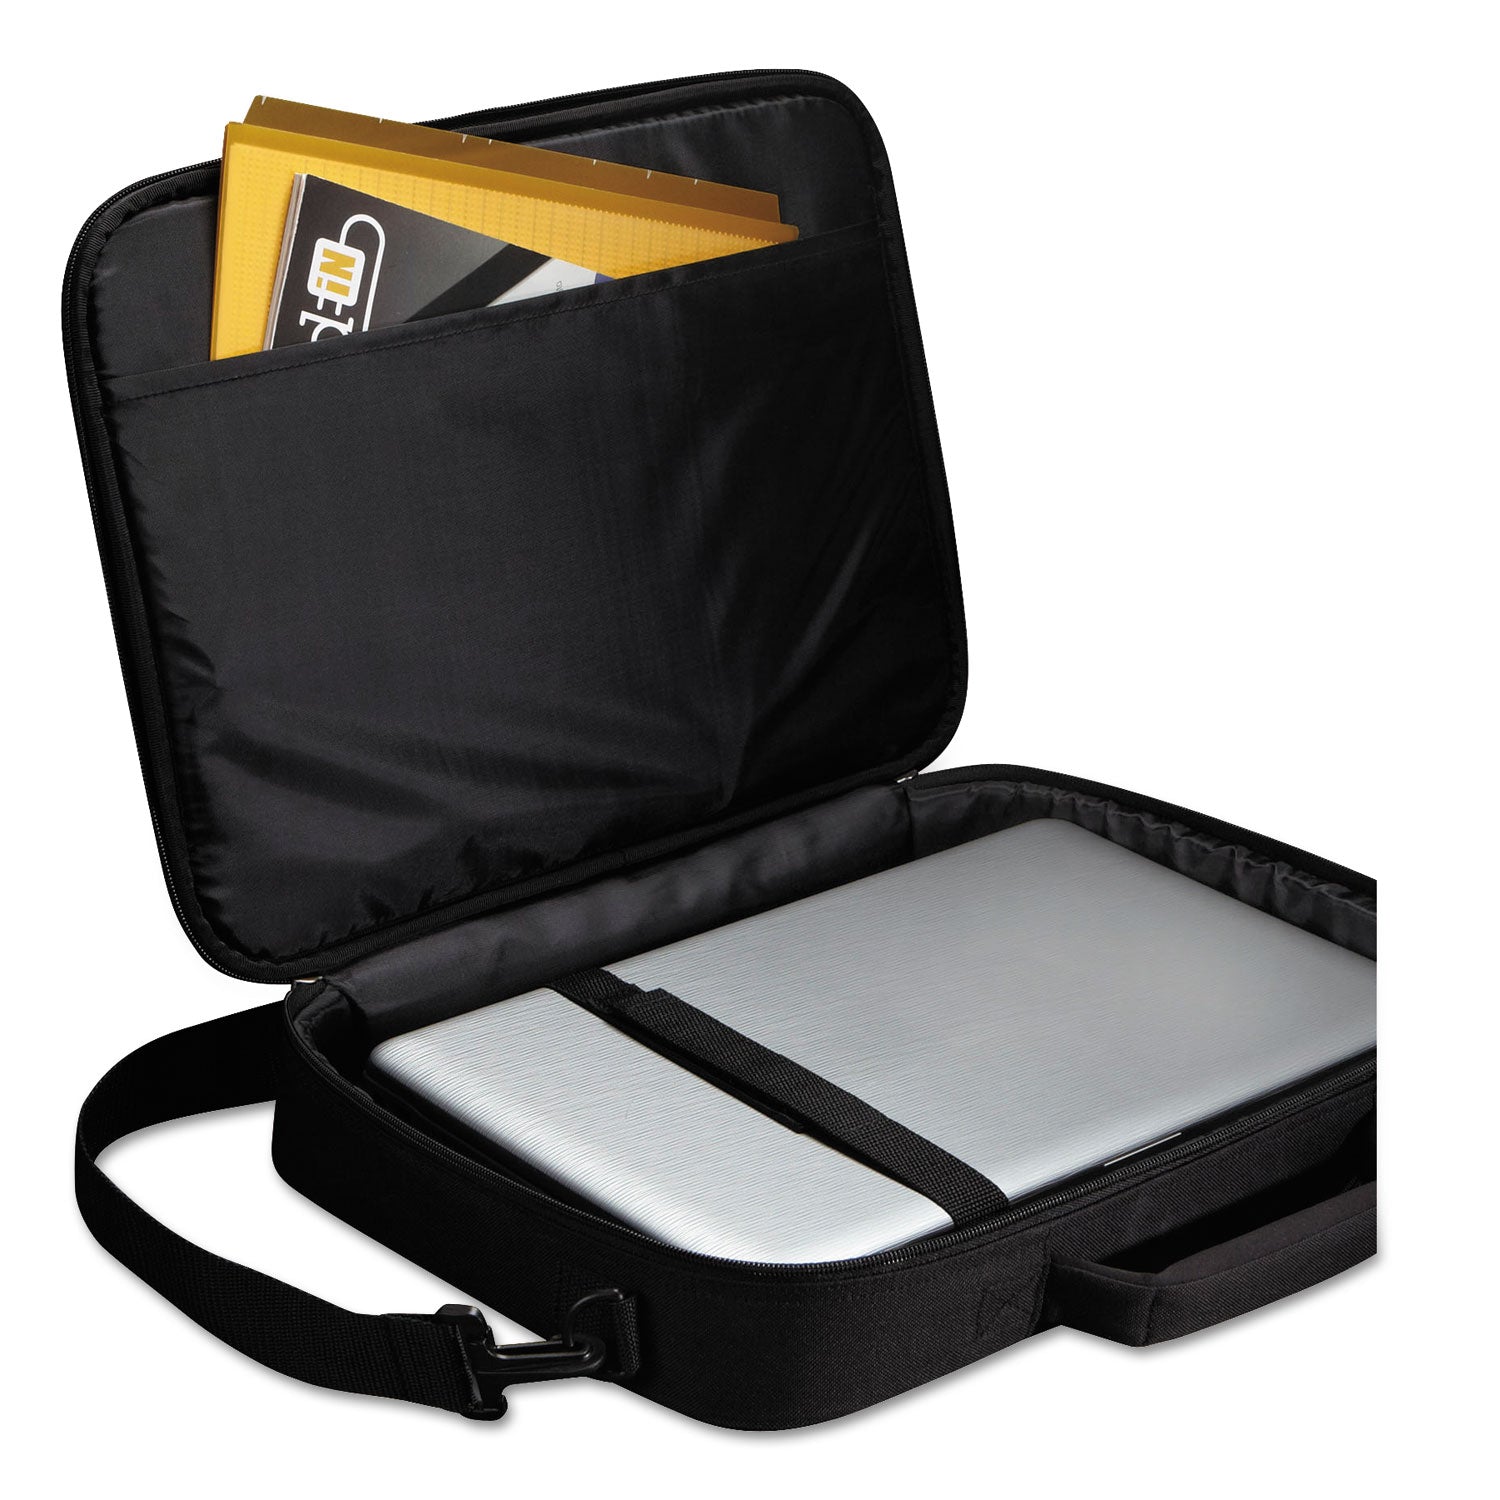 primary-laptop-clamshell-case-fits-devices-up-to-17-polyester-185-x-35-x-157-black_clg3201490 - 2